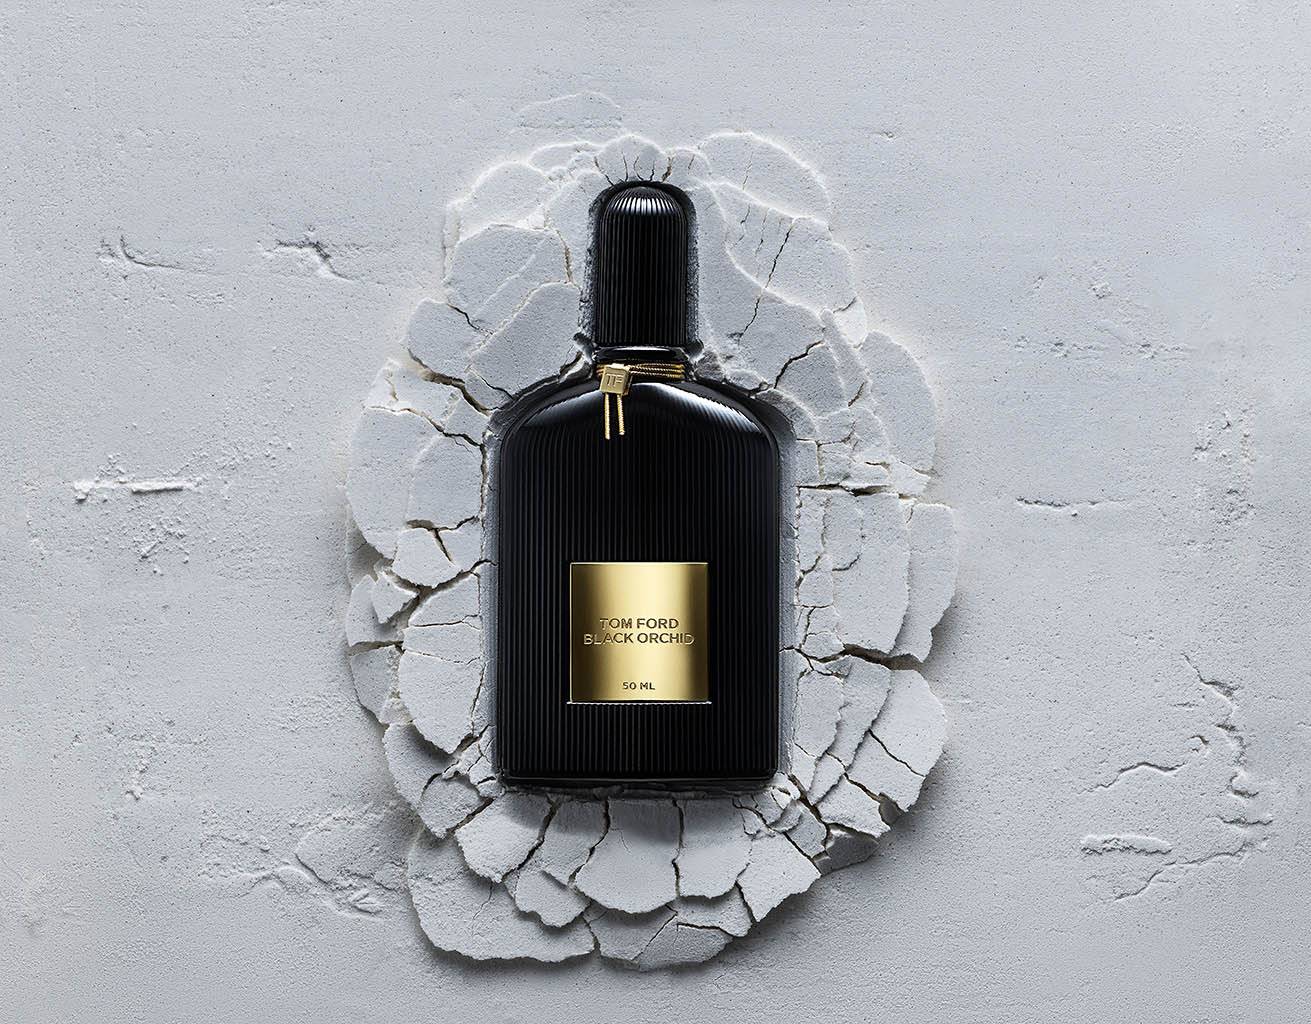 Cosmetics Photography of Tom Ford Black Orchid fragrance bottle by Packshot Factory